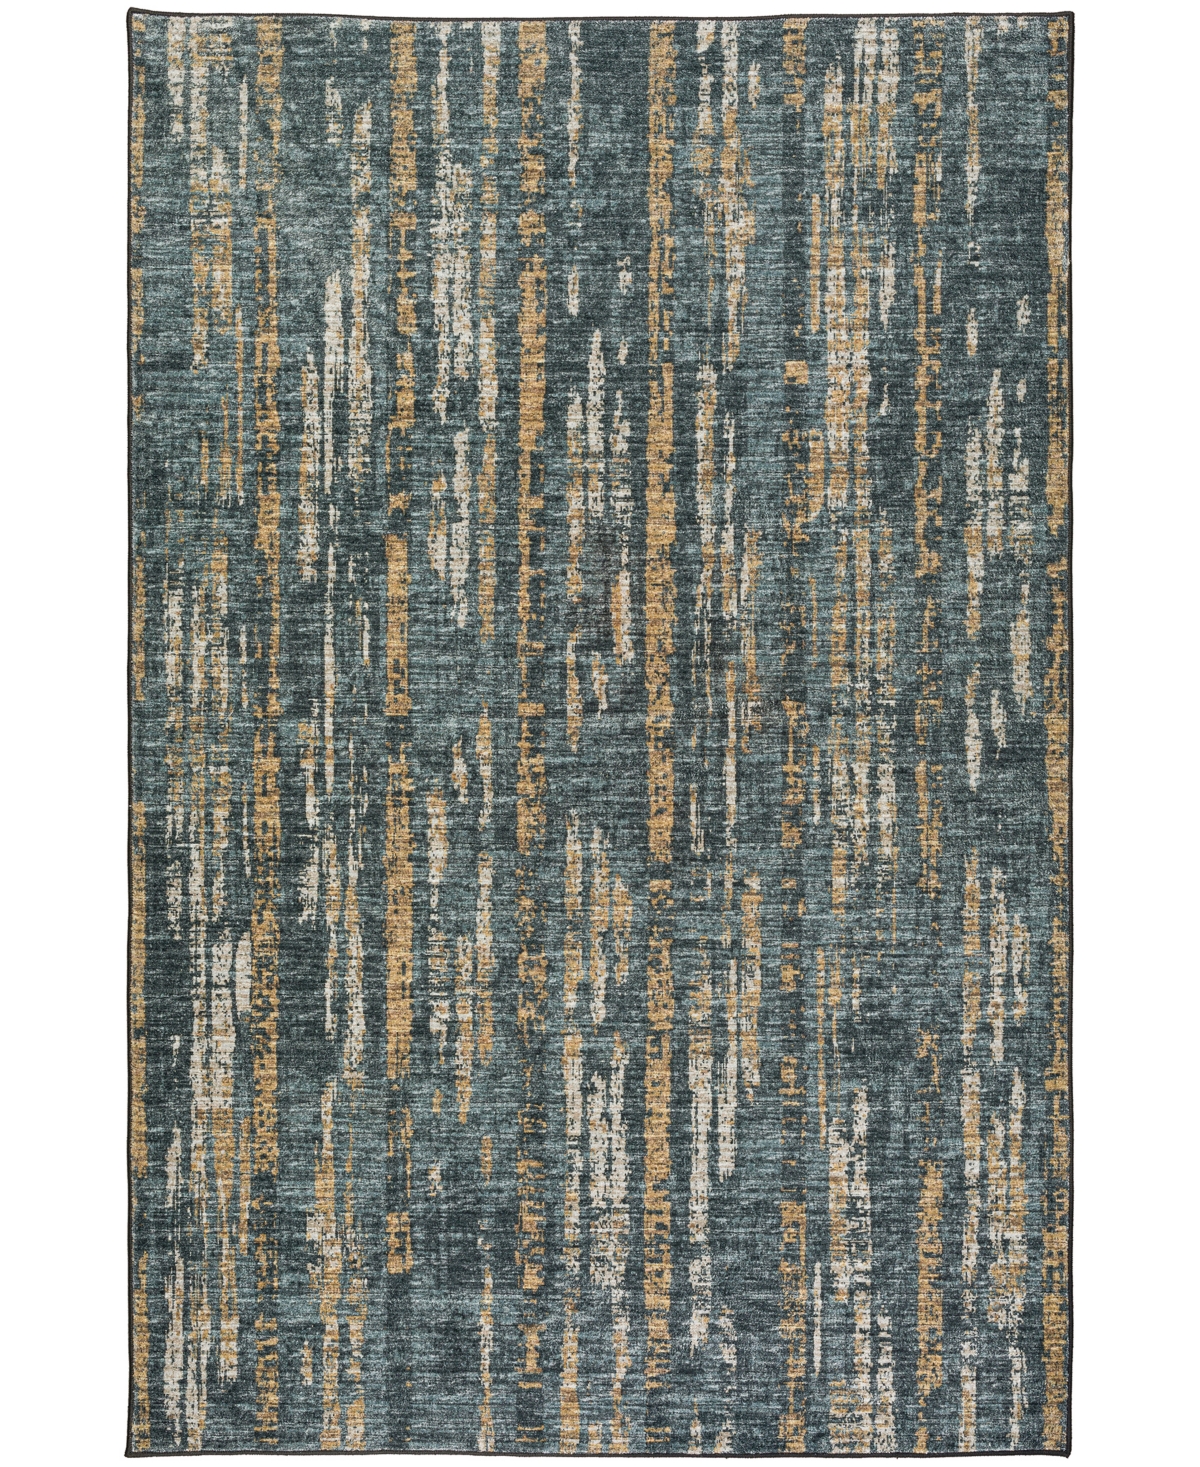 D Style Briggs Brg-6 8' x 10' Area Rug - Charcoal